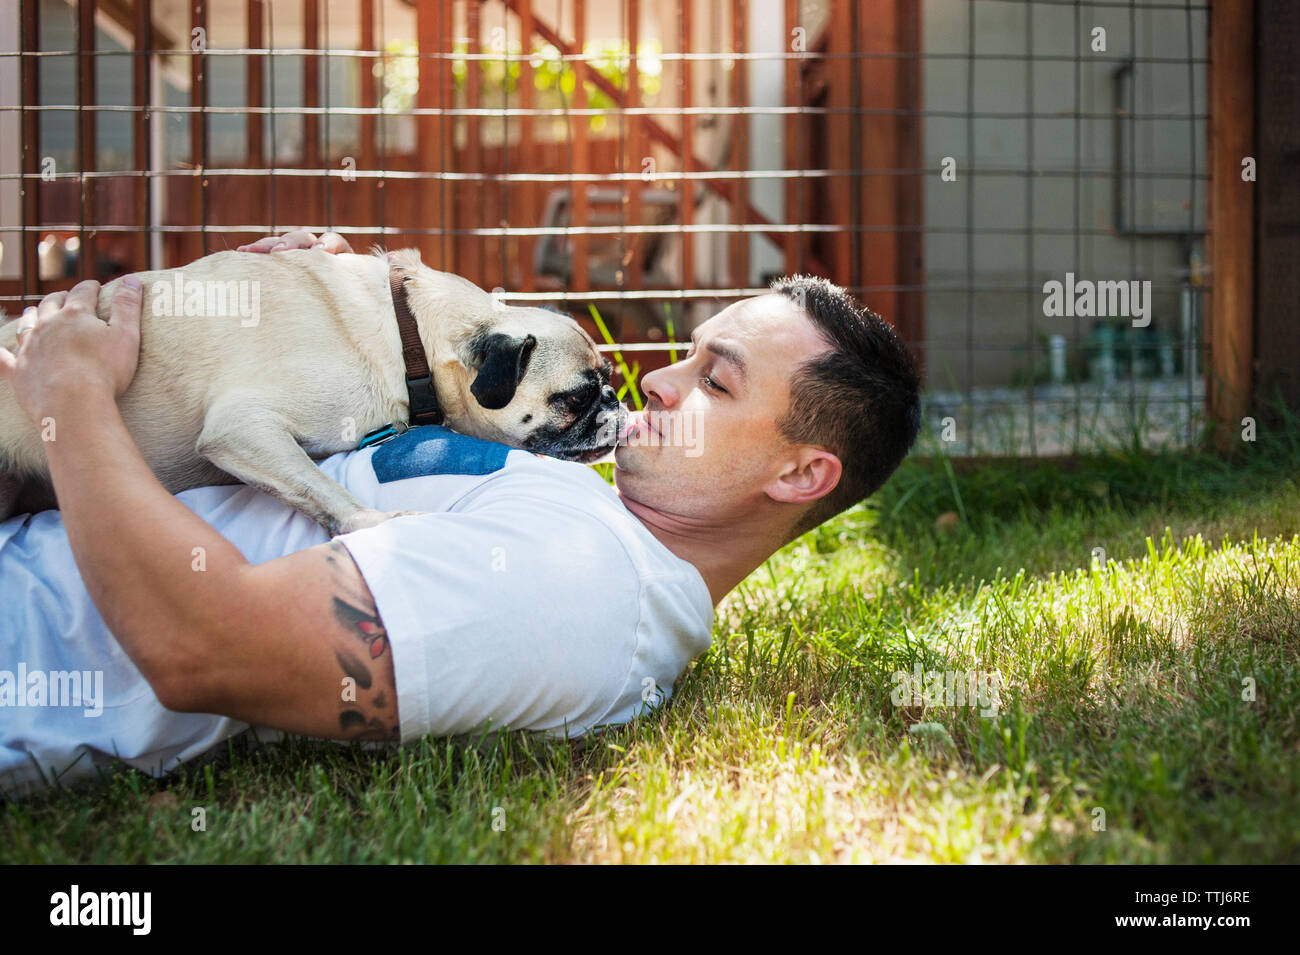 Man playing with pug on grassy field in backyard Stock Photo